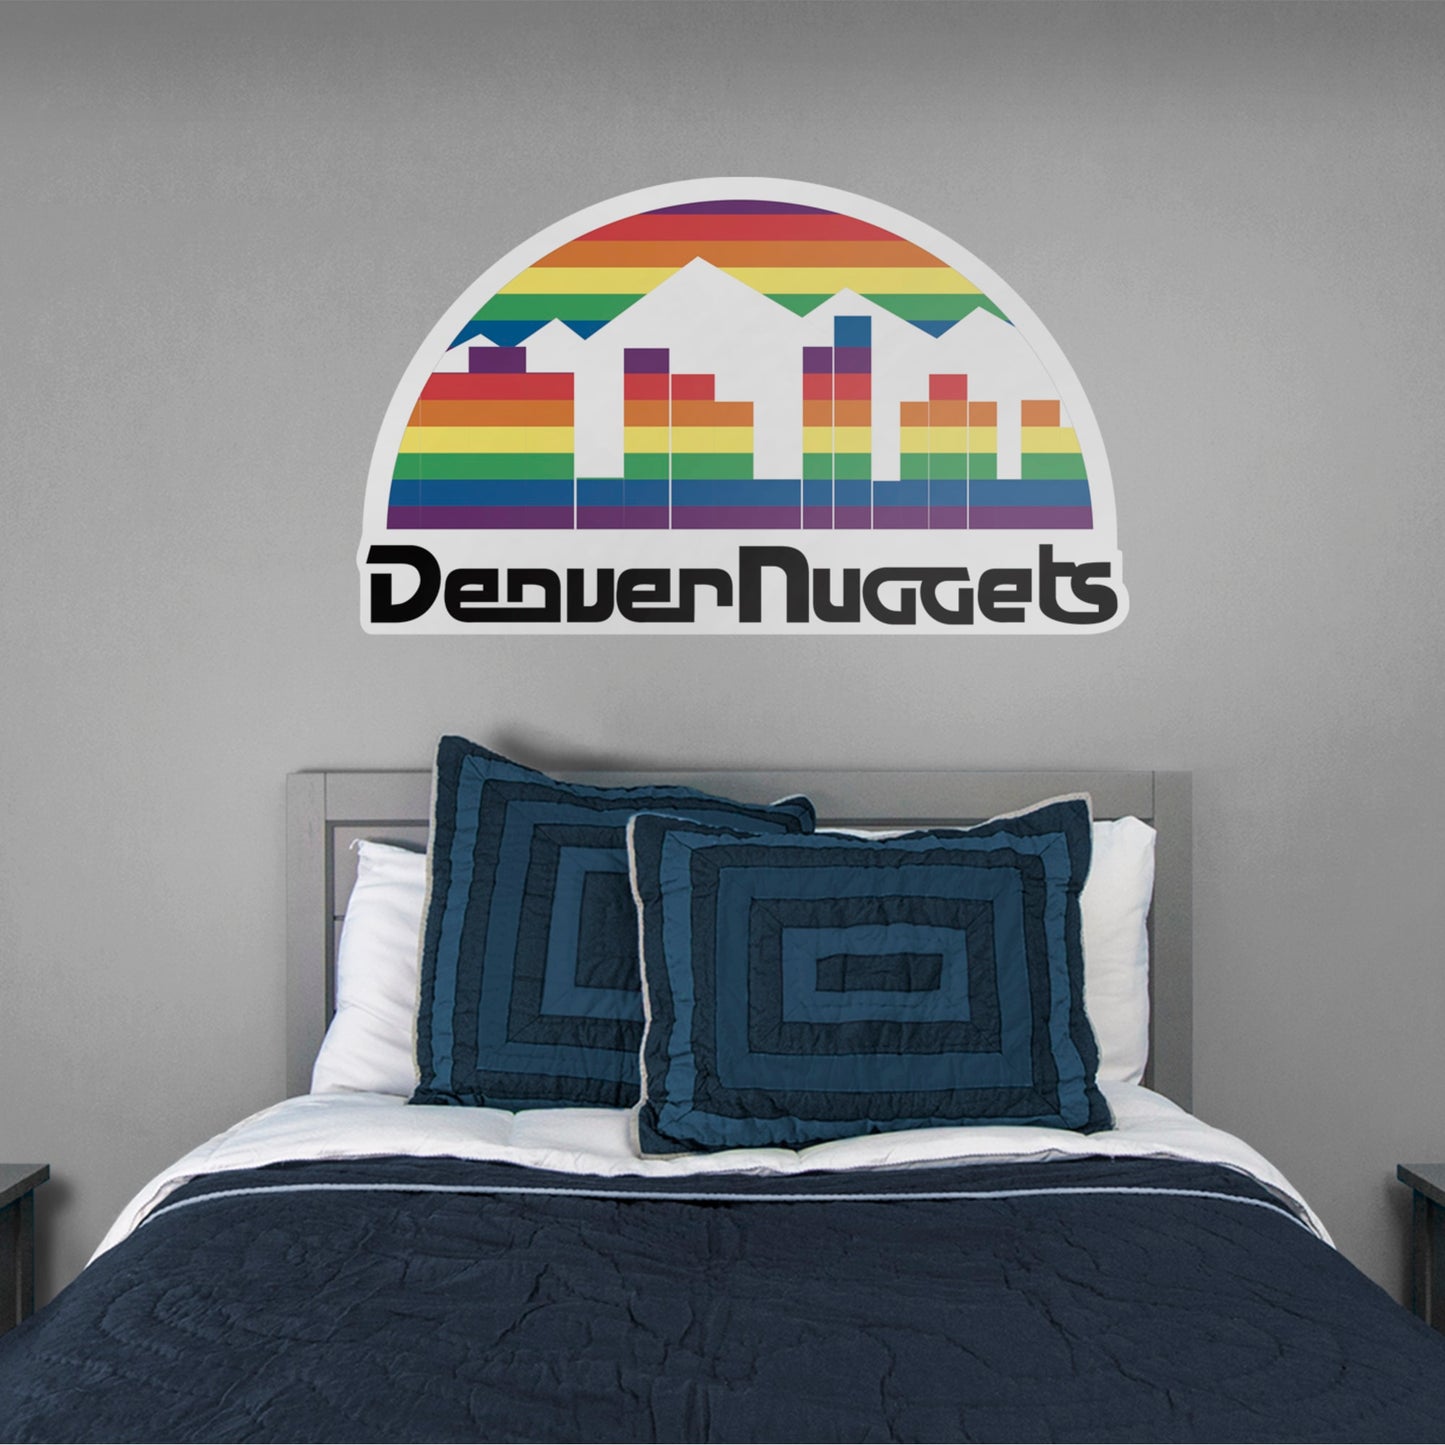 Denver Nuggets: Classic Logo - Officially Licensed NBA Removable Wall Decal